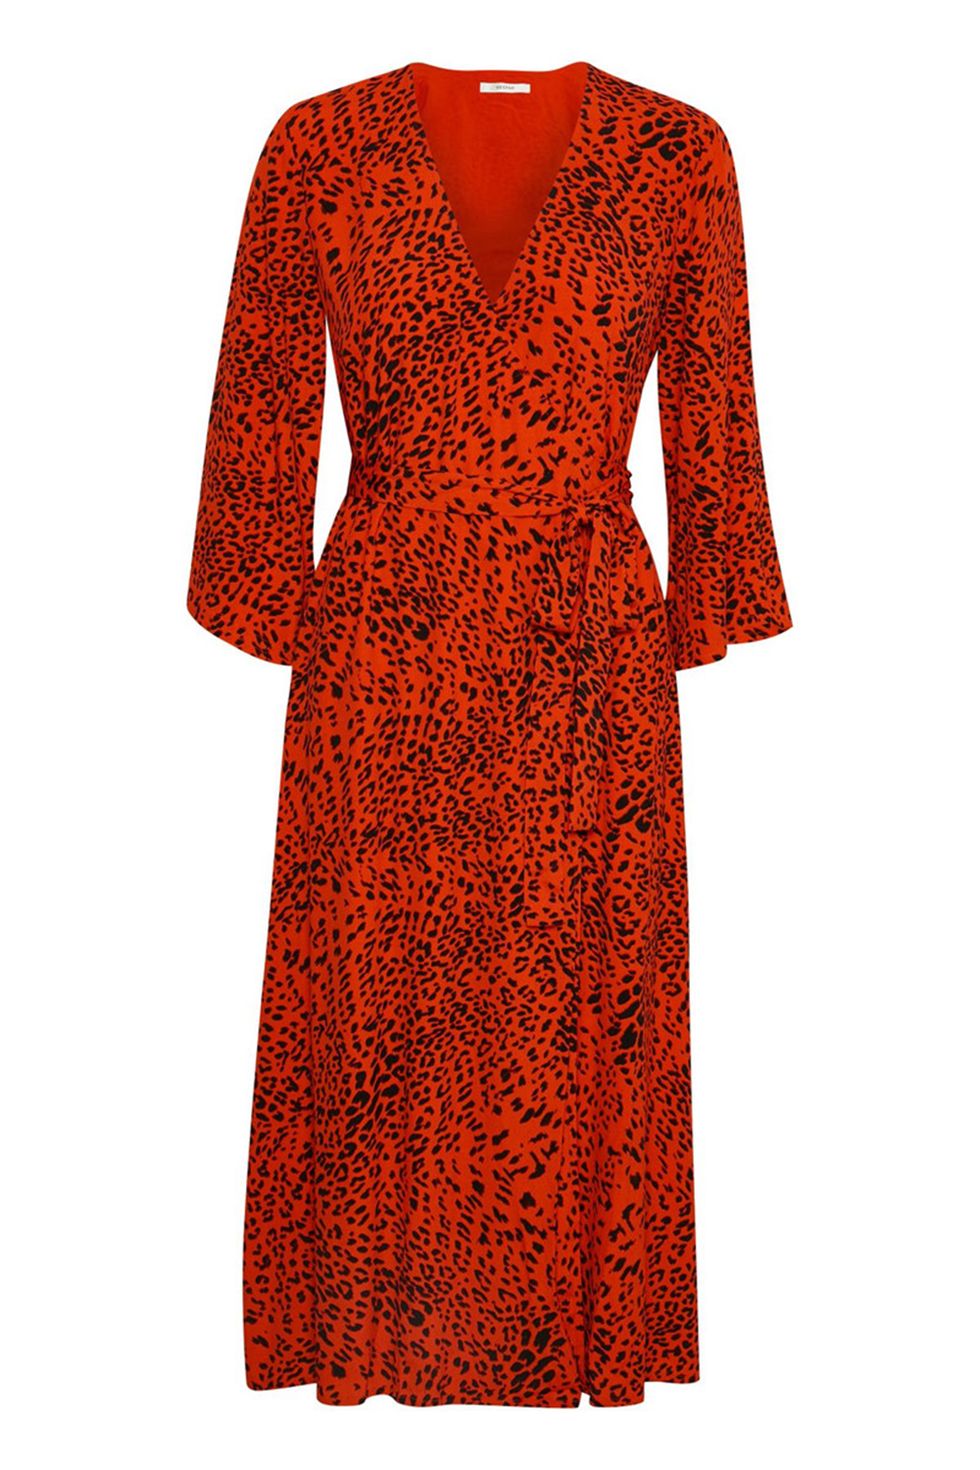 Clothing, Dress, Day dress, Orange, Red, Sleeve, Cocktail dress, Neck, A-line, Outerwear, 